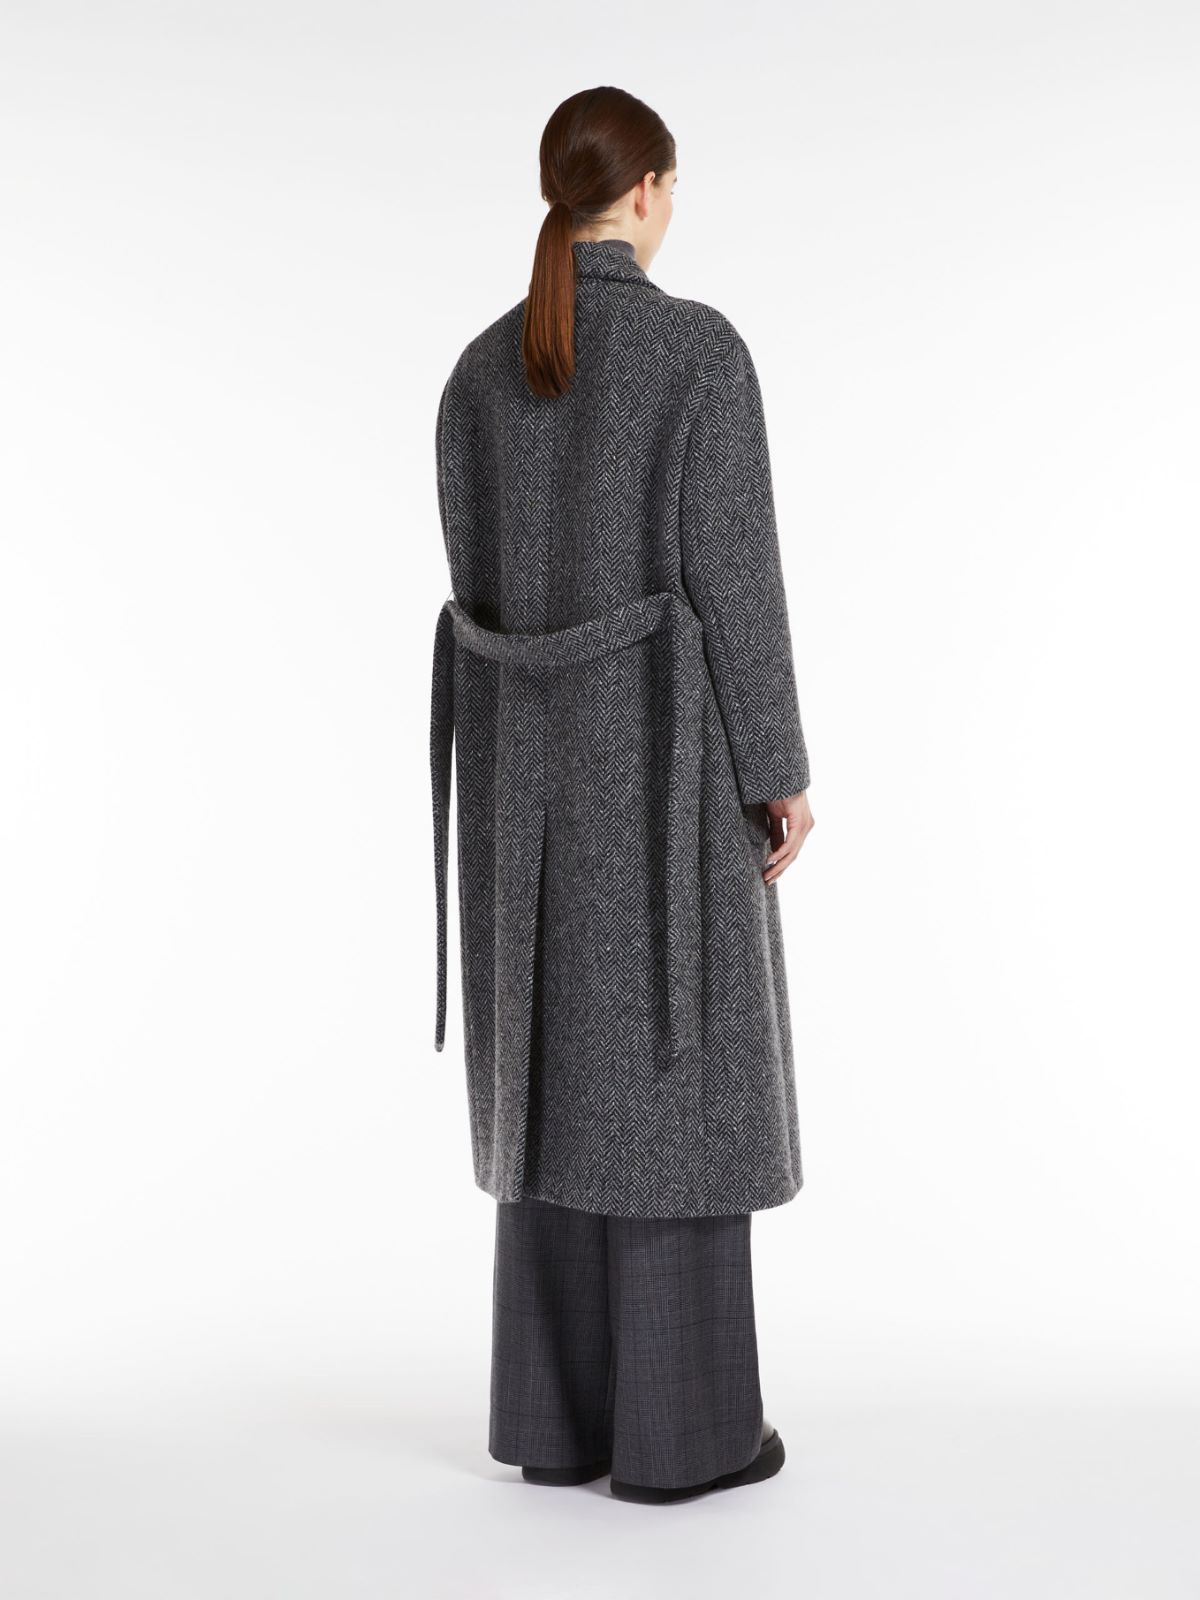 Cappotto in tweed di lana - ANTRACITE - Weekend Max Mara - 3